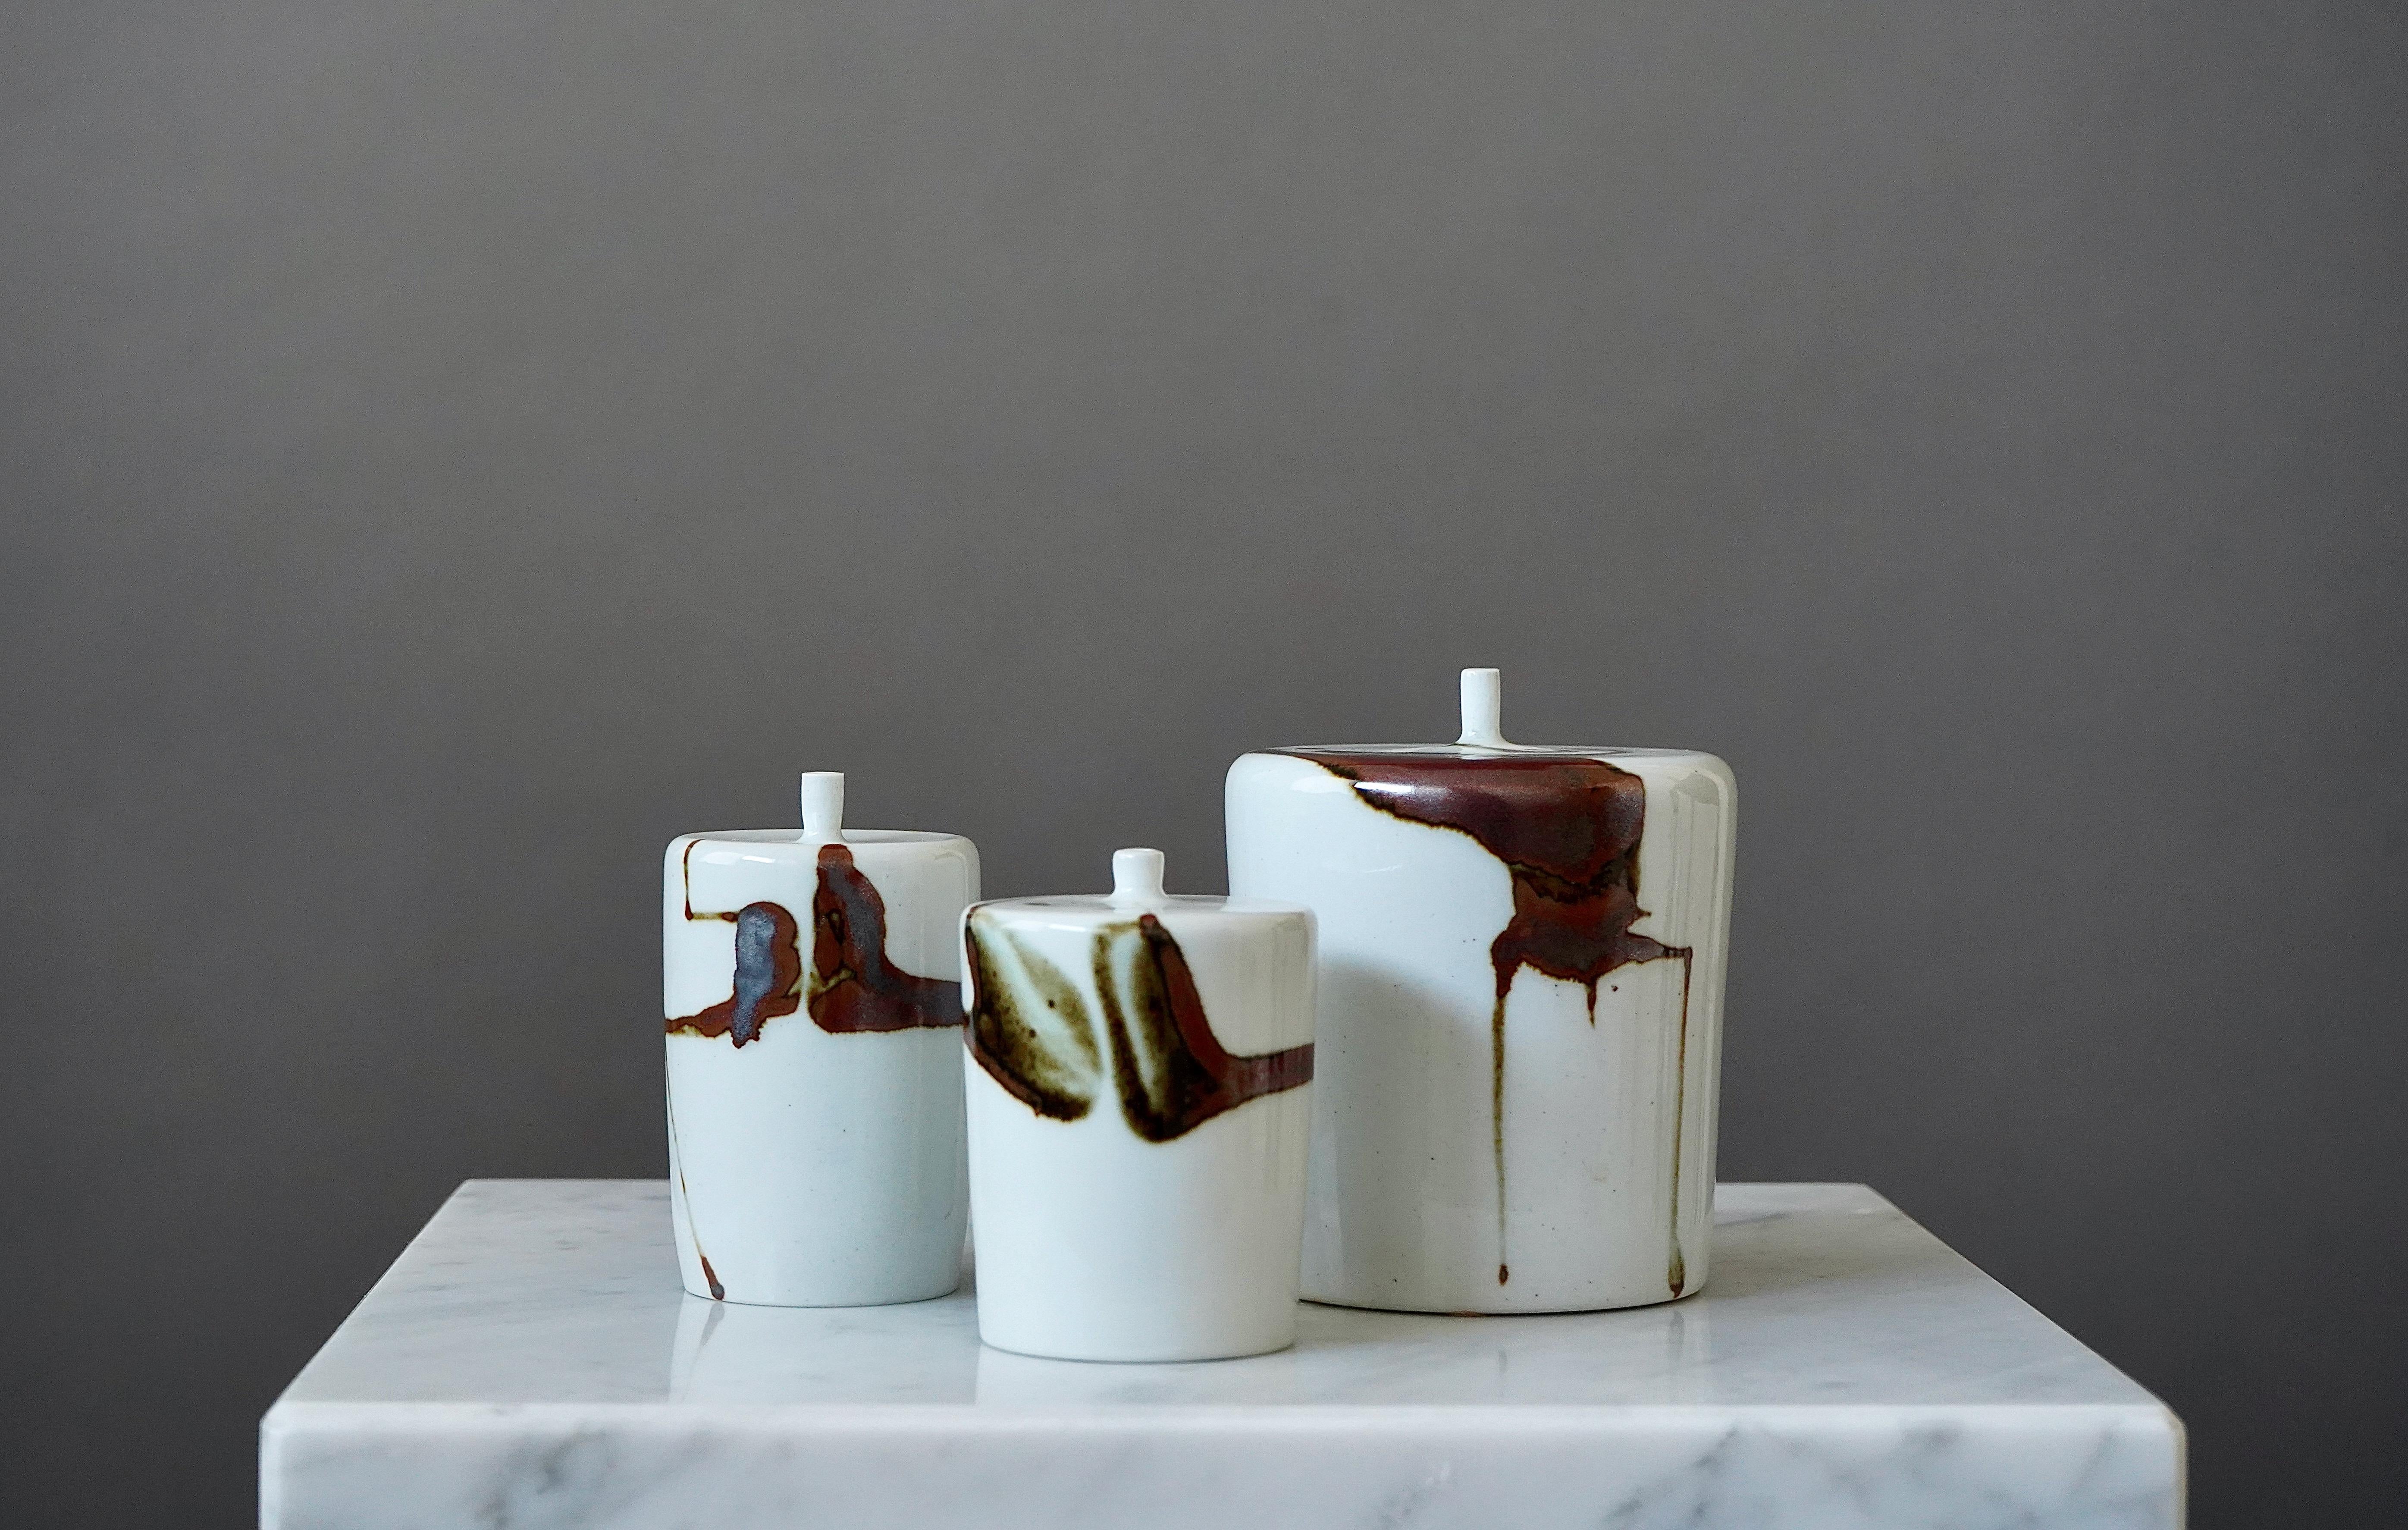 A set of beautiful stoneware vases with amazing glaze. 
Made by Claes Thell, in the Artist's studio, Höganäs, Sweden, 1991.

Excellent condition. Signed Thell '91.

Claes Thell is a Swedish ceramicist known for his intricate and sculptural